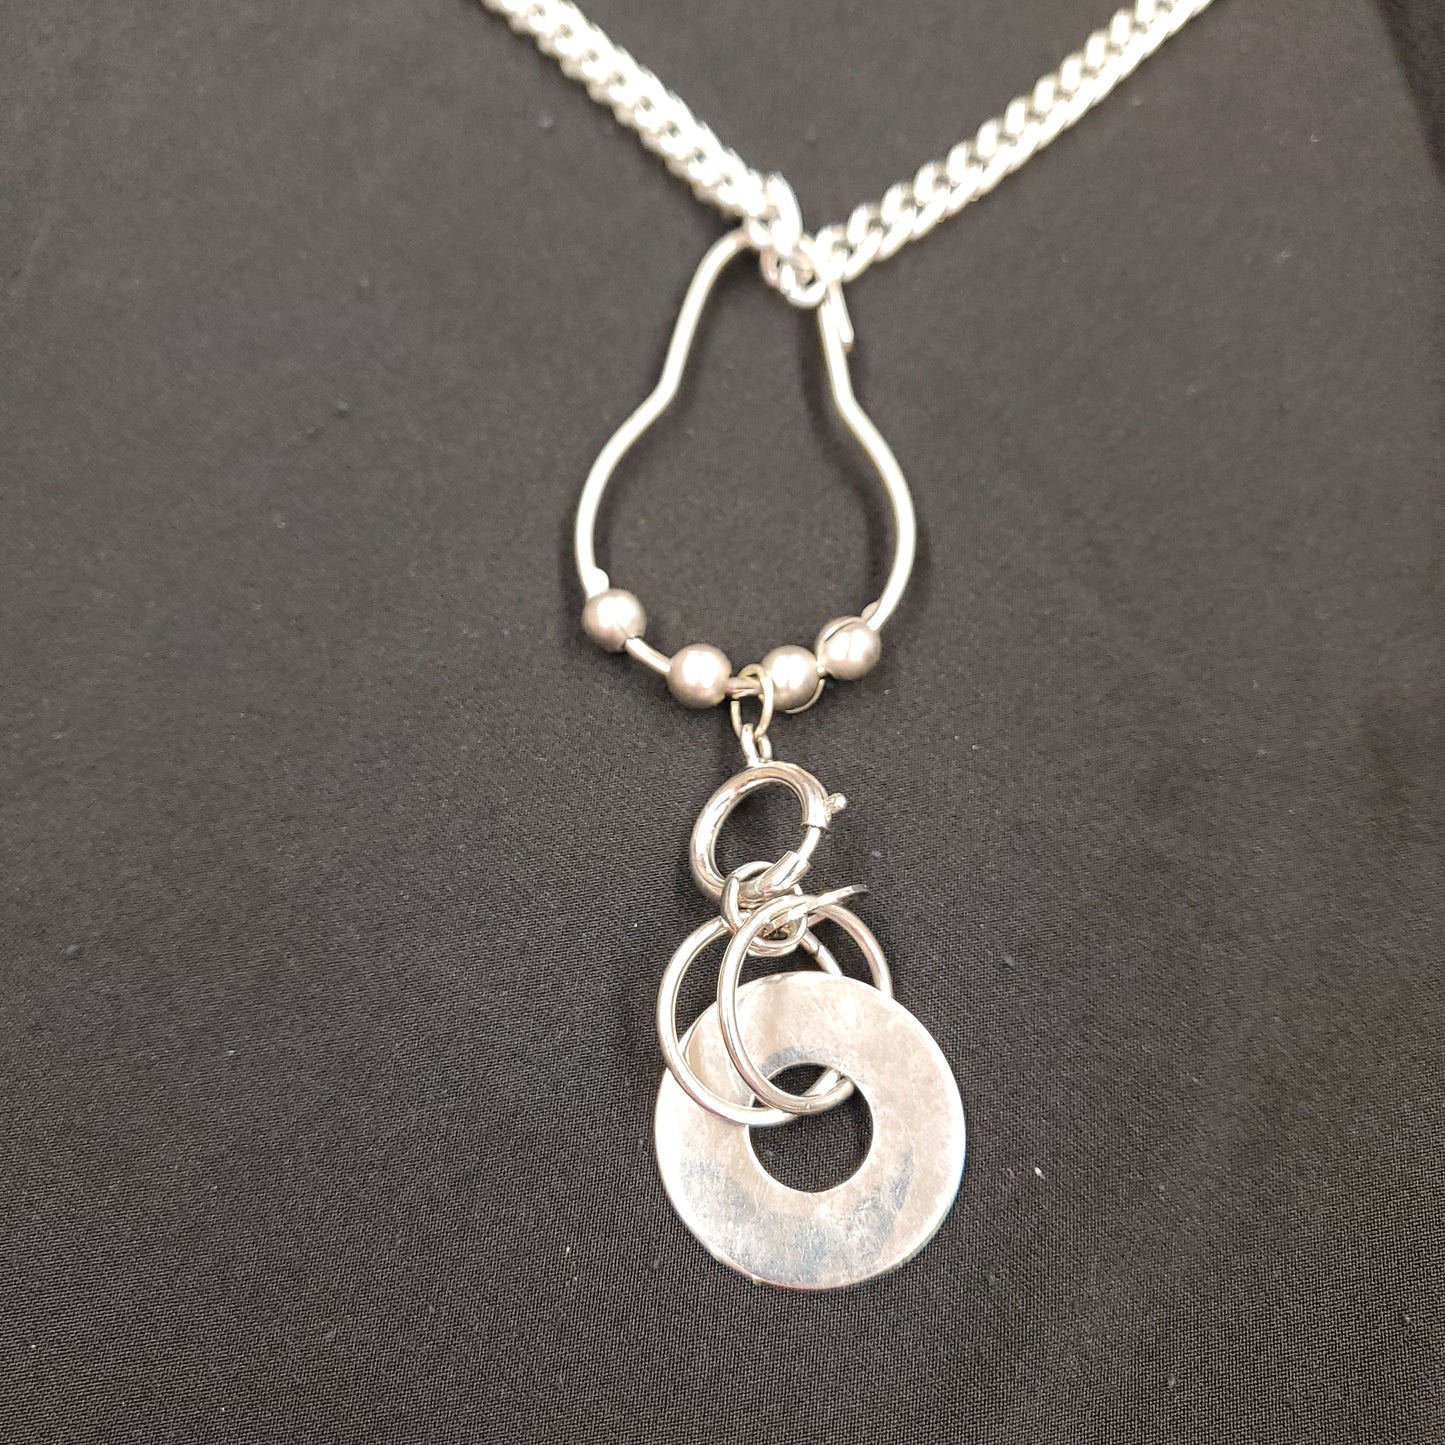 28" Silver Chain Necklaces